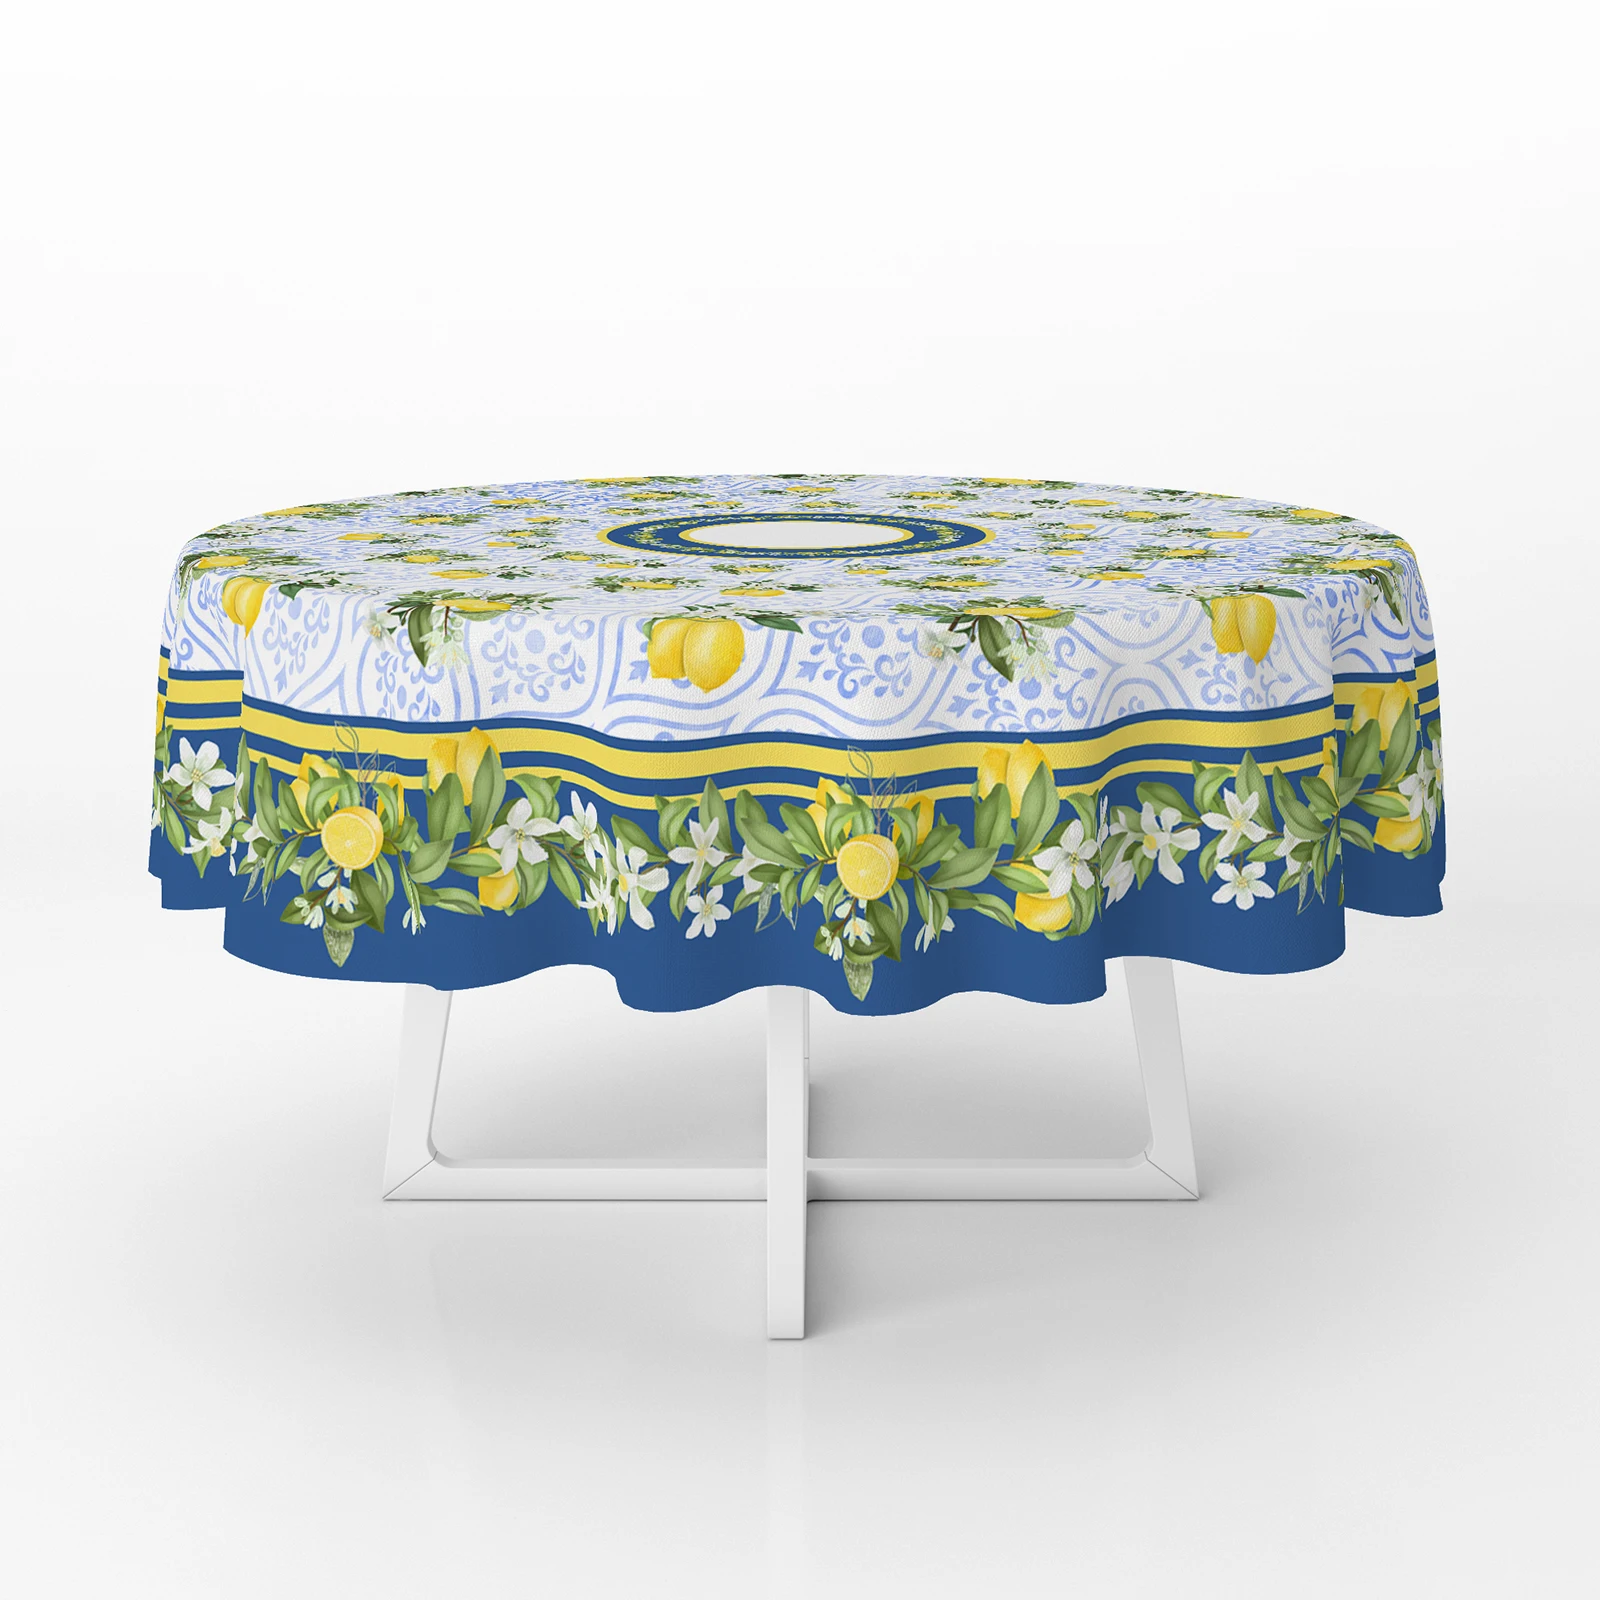 

Watercolor Lemon Round Tablecloth Kitchen Decor Waterproof Table Cloth Dining Coffee Table Cover Picnic Mat